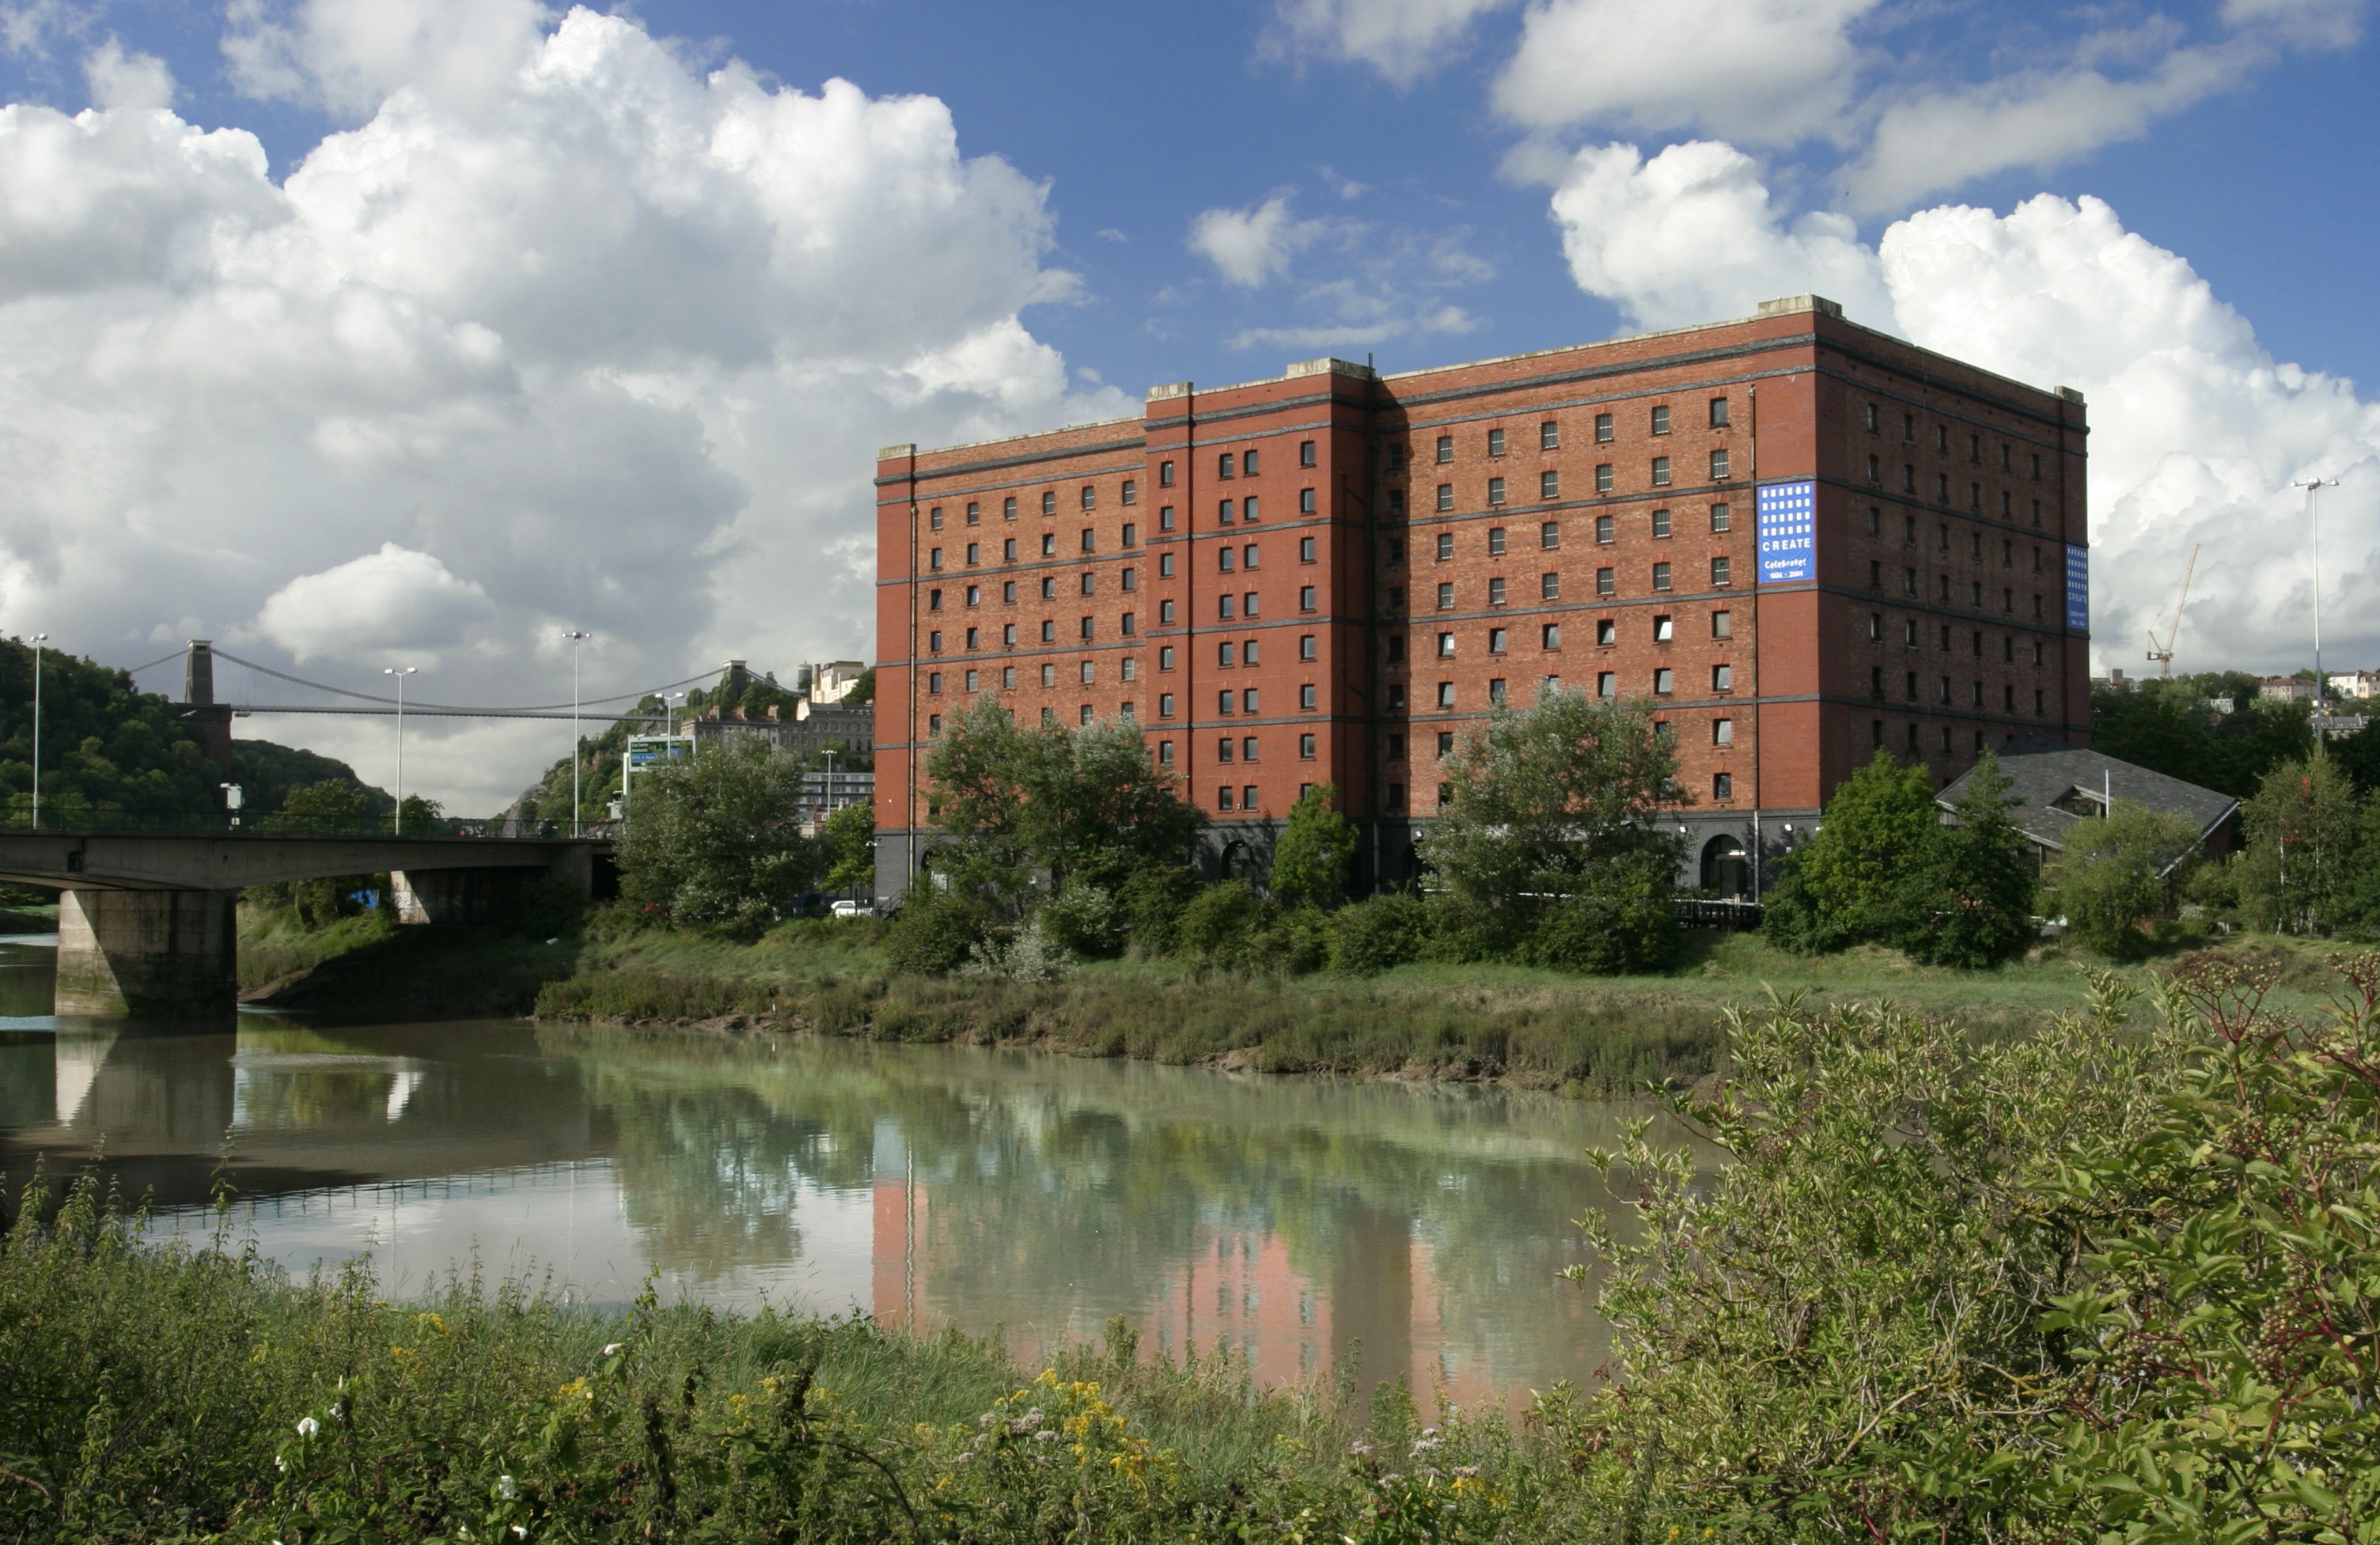 B Bond Warehouse, the home of Bristol Archives